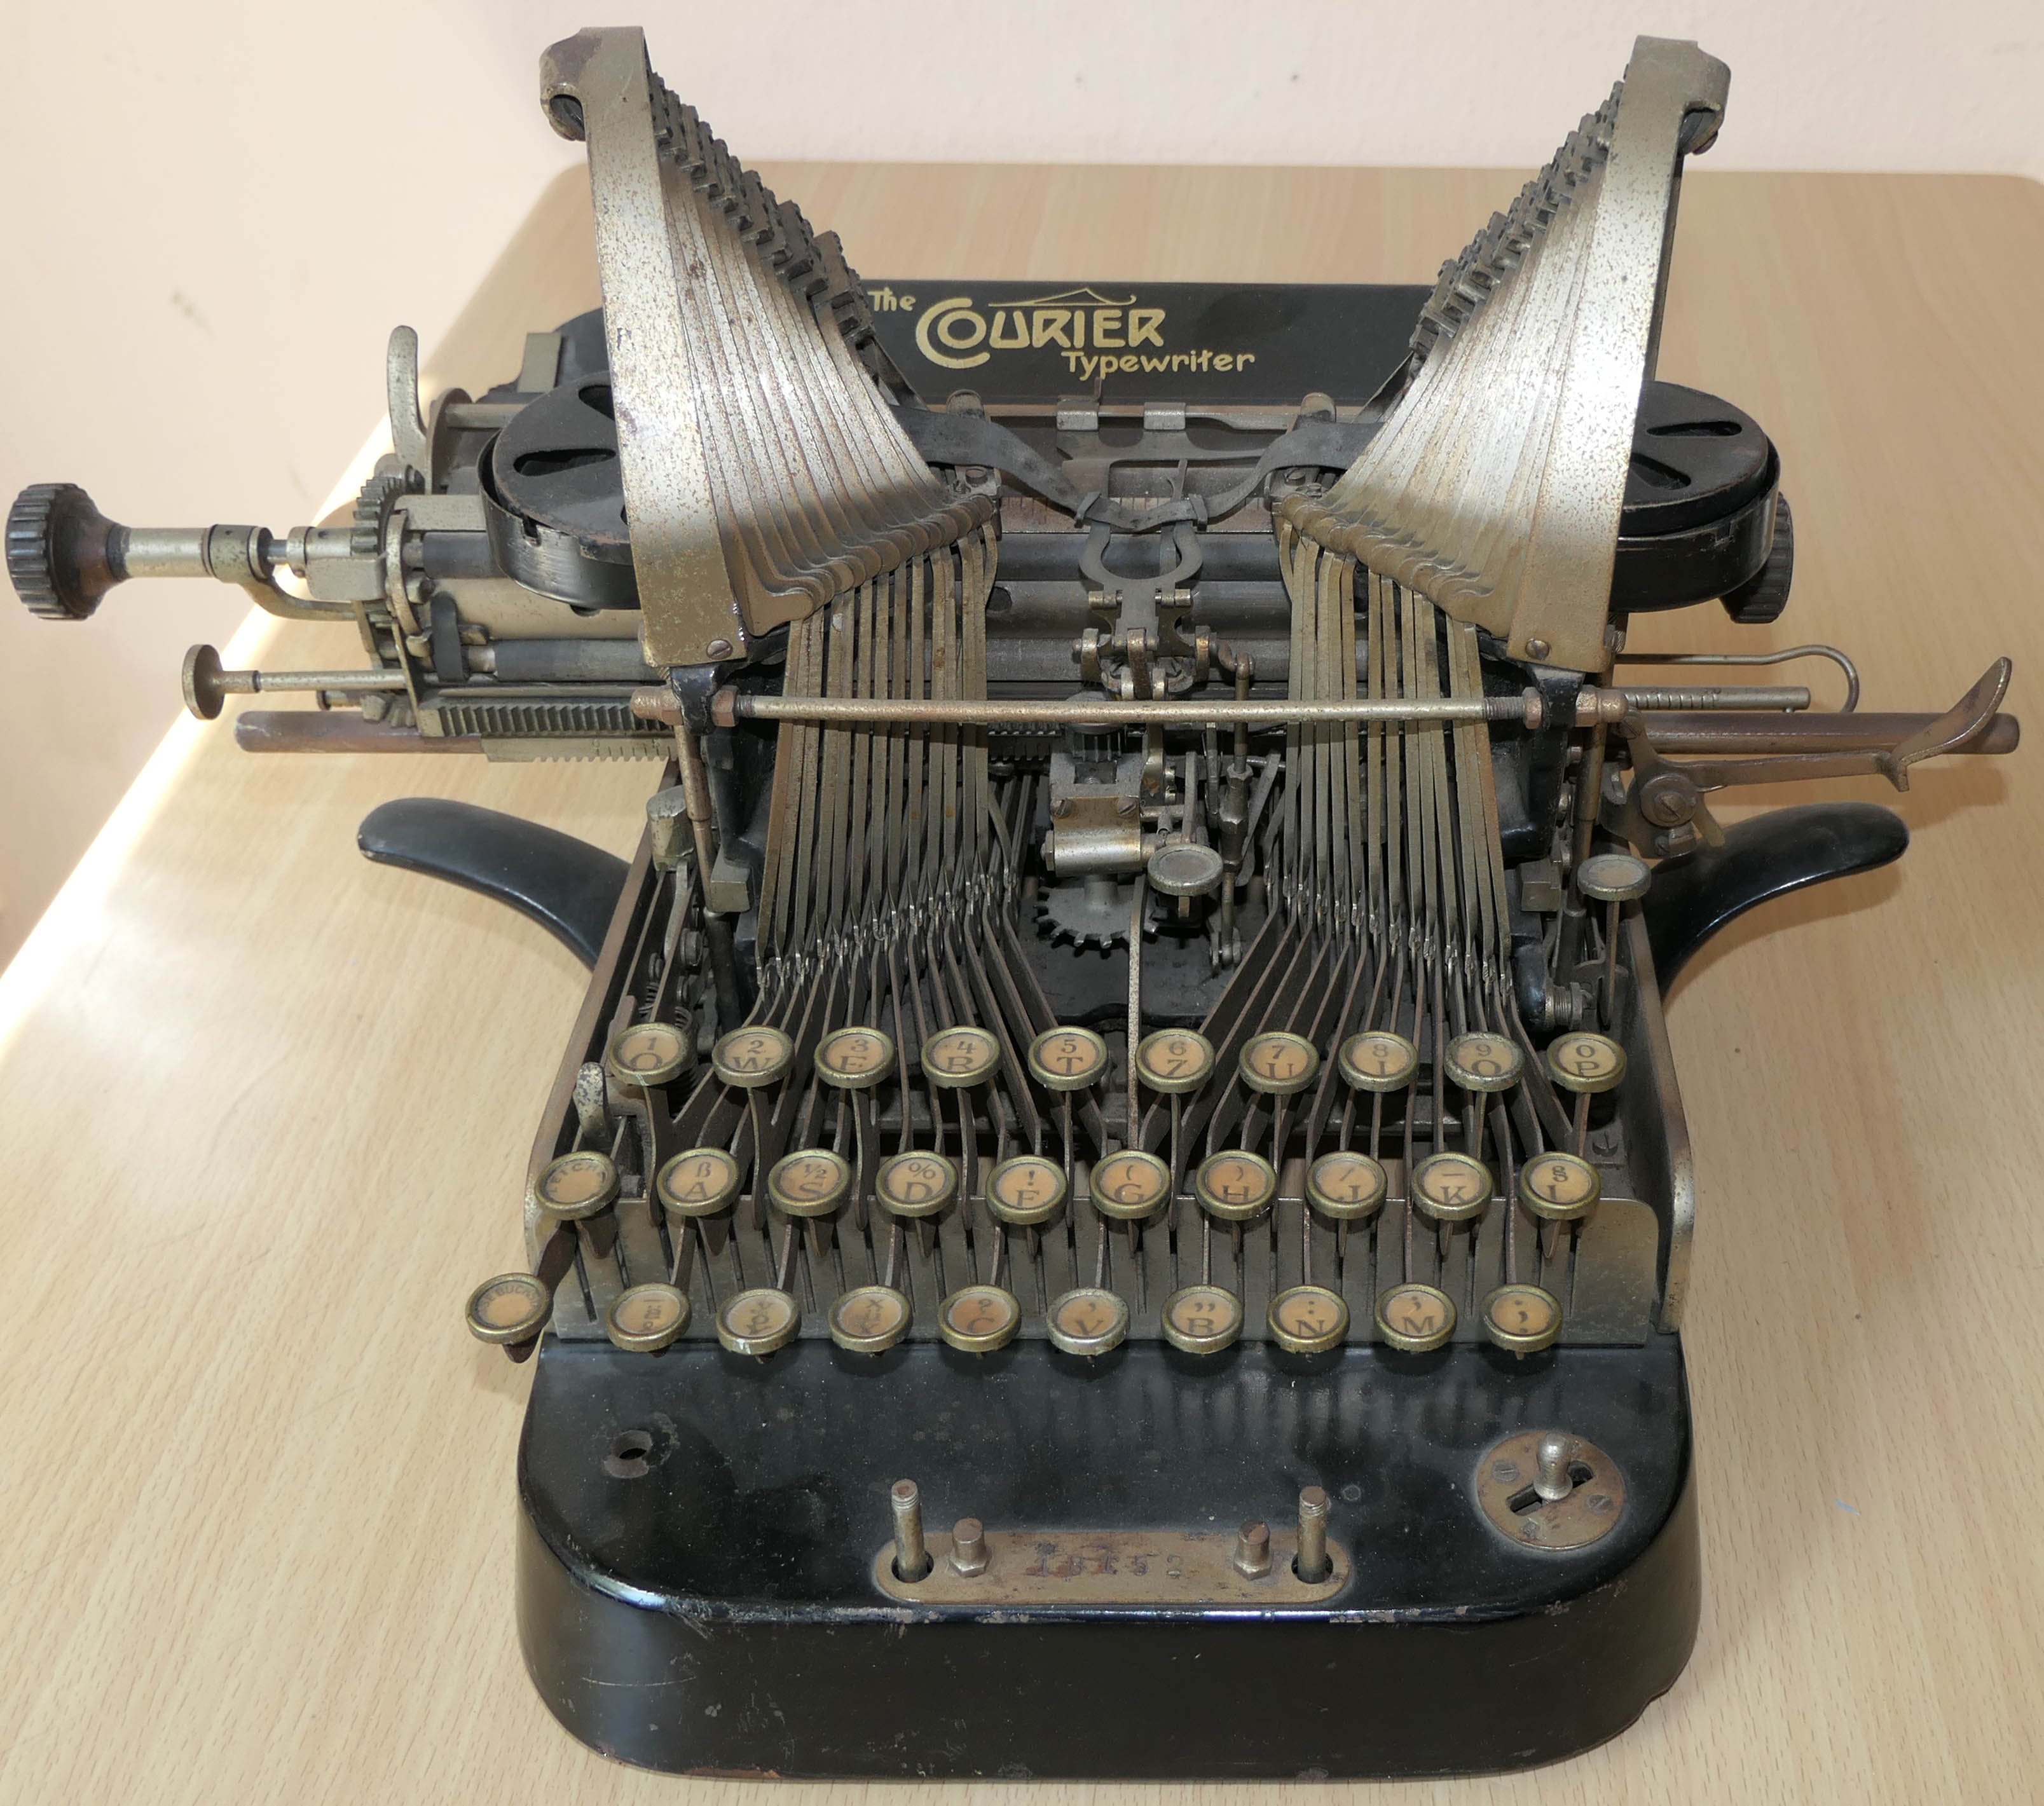 The Courier Typewriter (museum comp:ex CC BY-NC-SA)